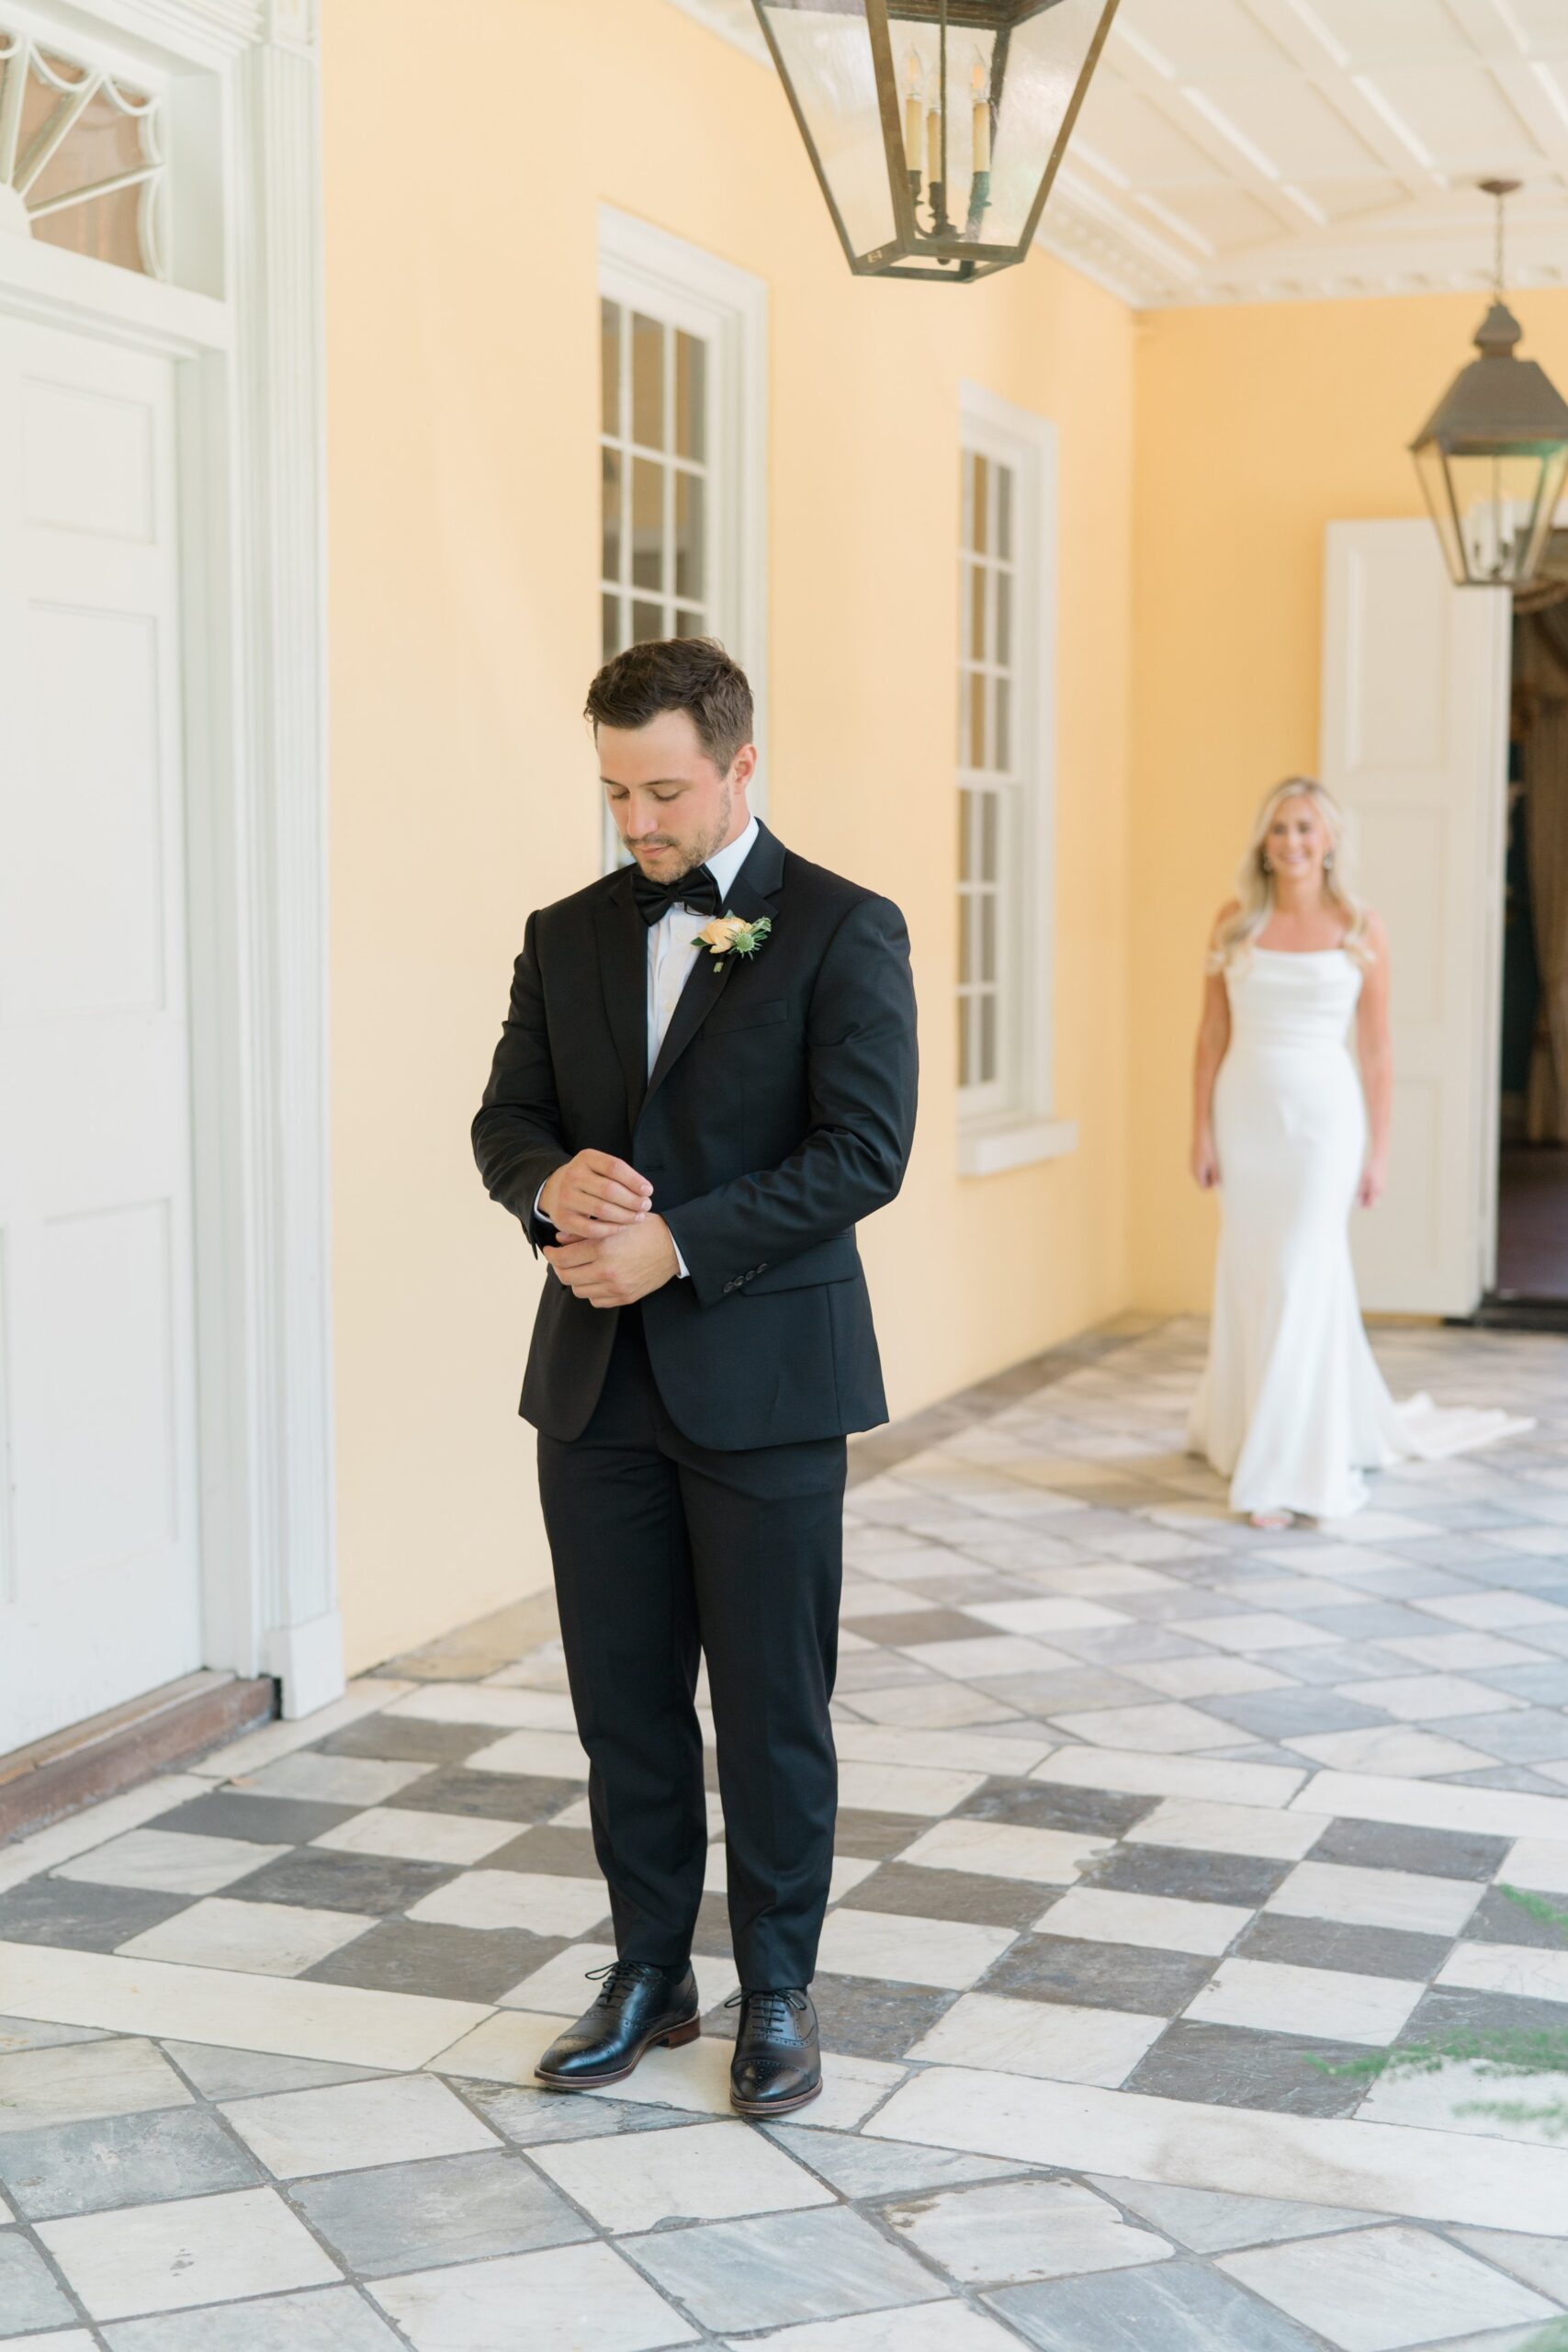 nervous emotional groom makes sure everything is perfect while bride walks up to see him for the first time